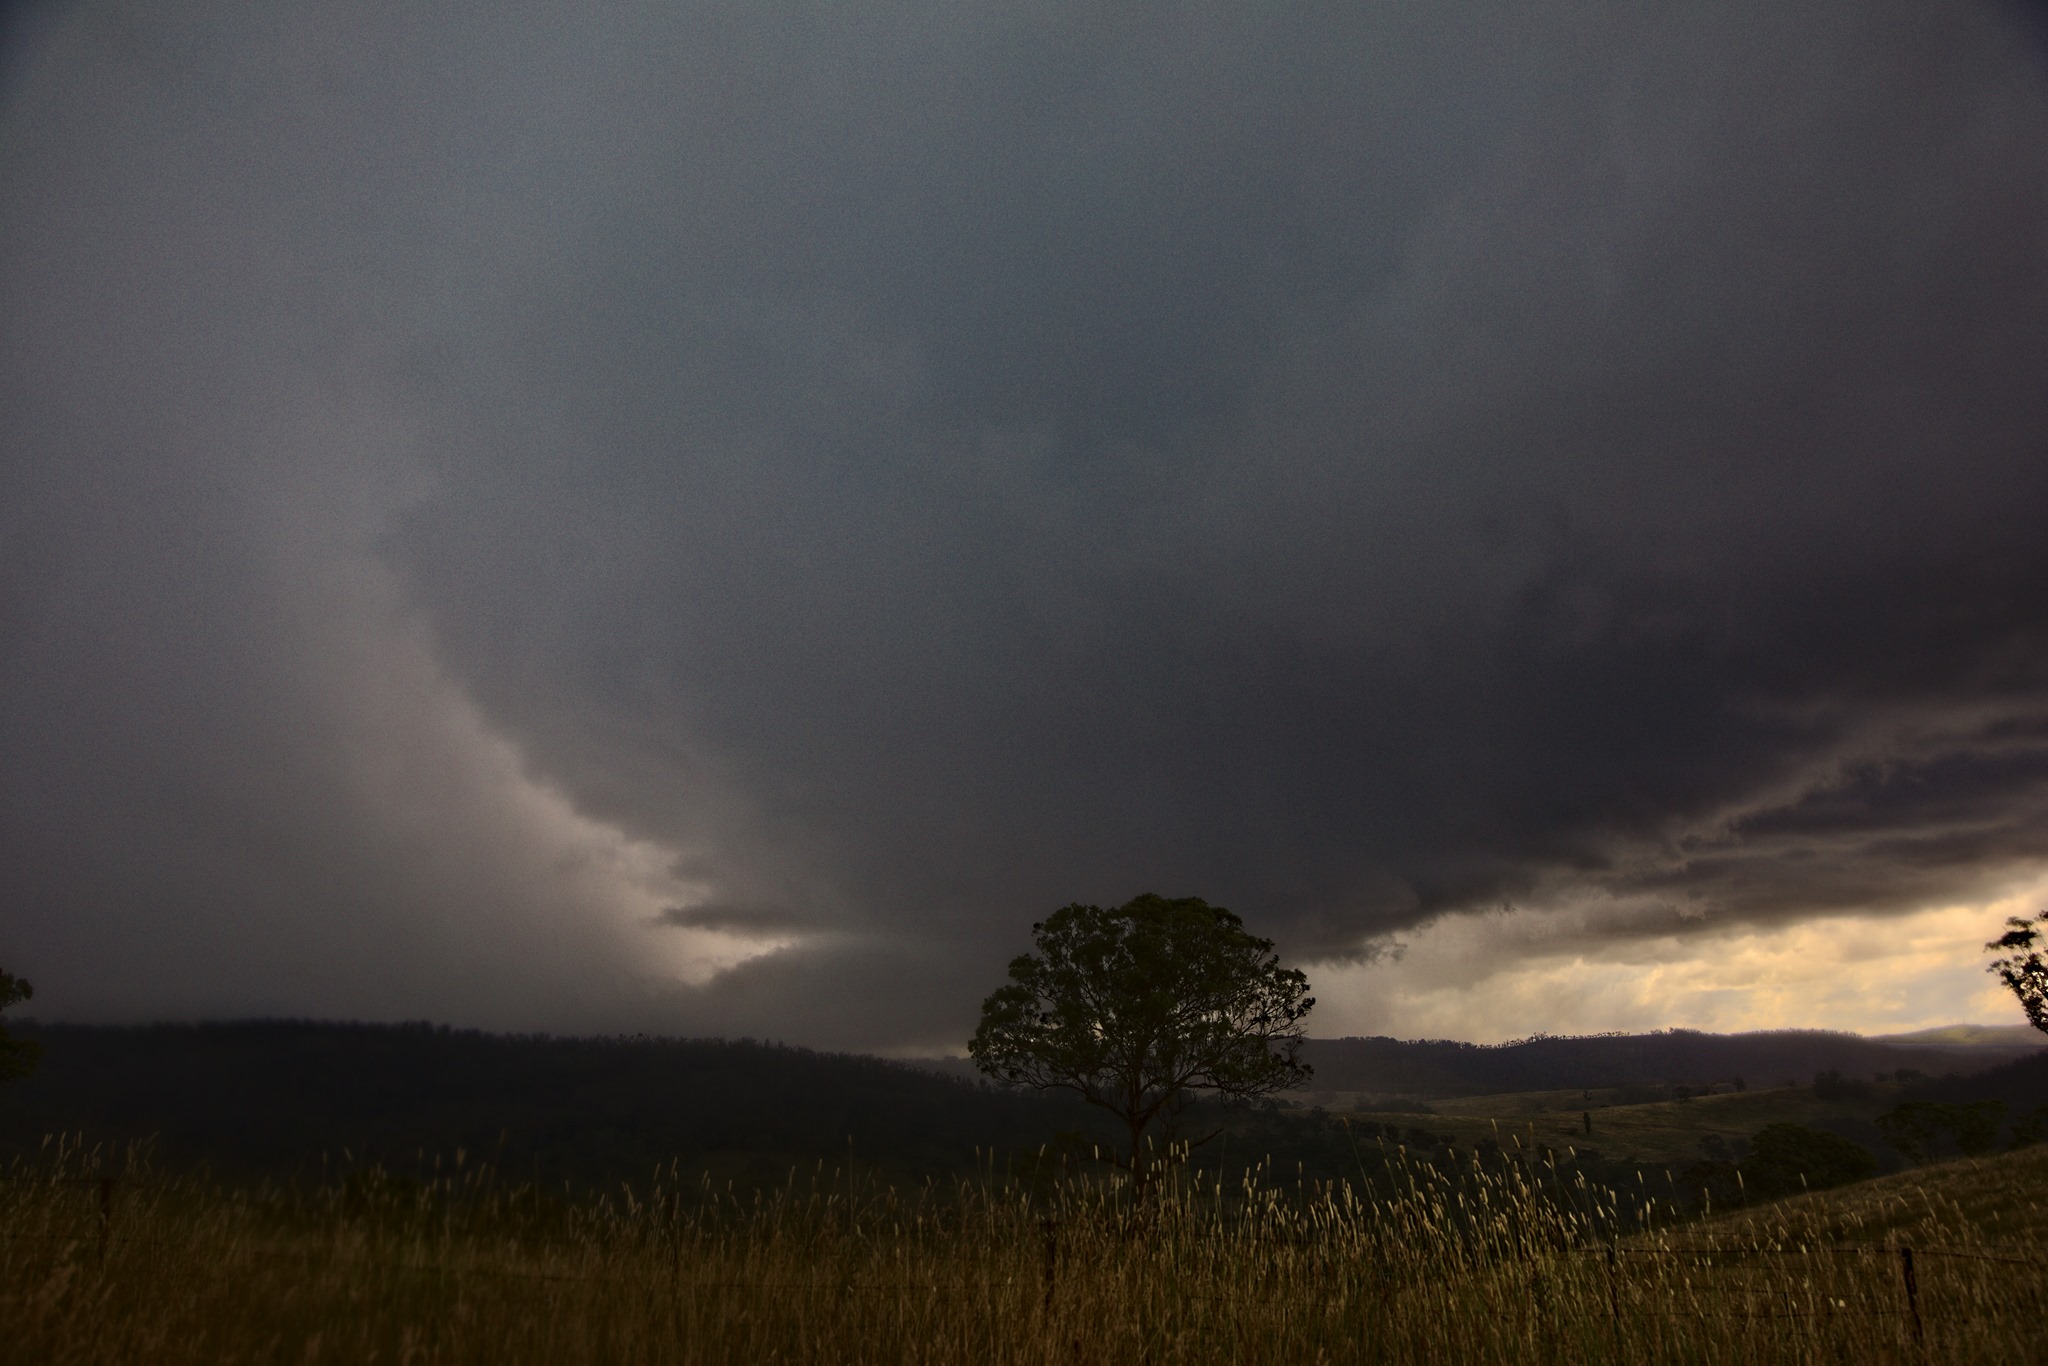 Started the day near Penrith and headed leisurely to Oberon. First storms of the day - one took shape and intensified. After getting hailed on (up to ...